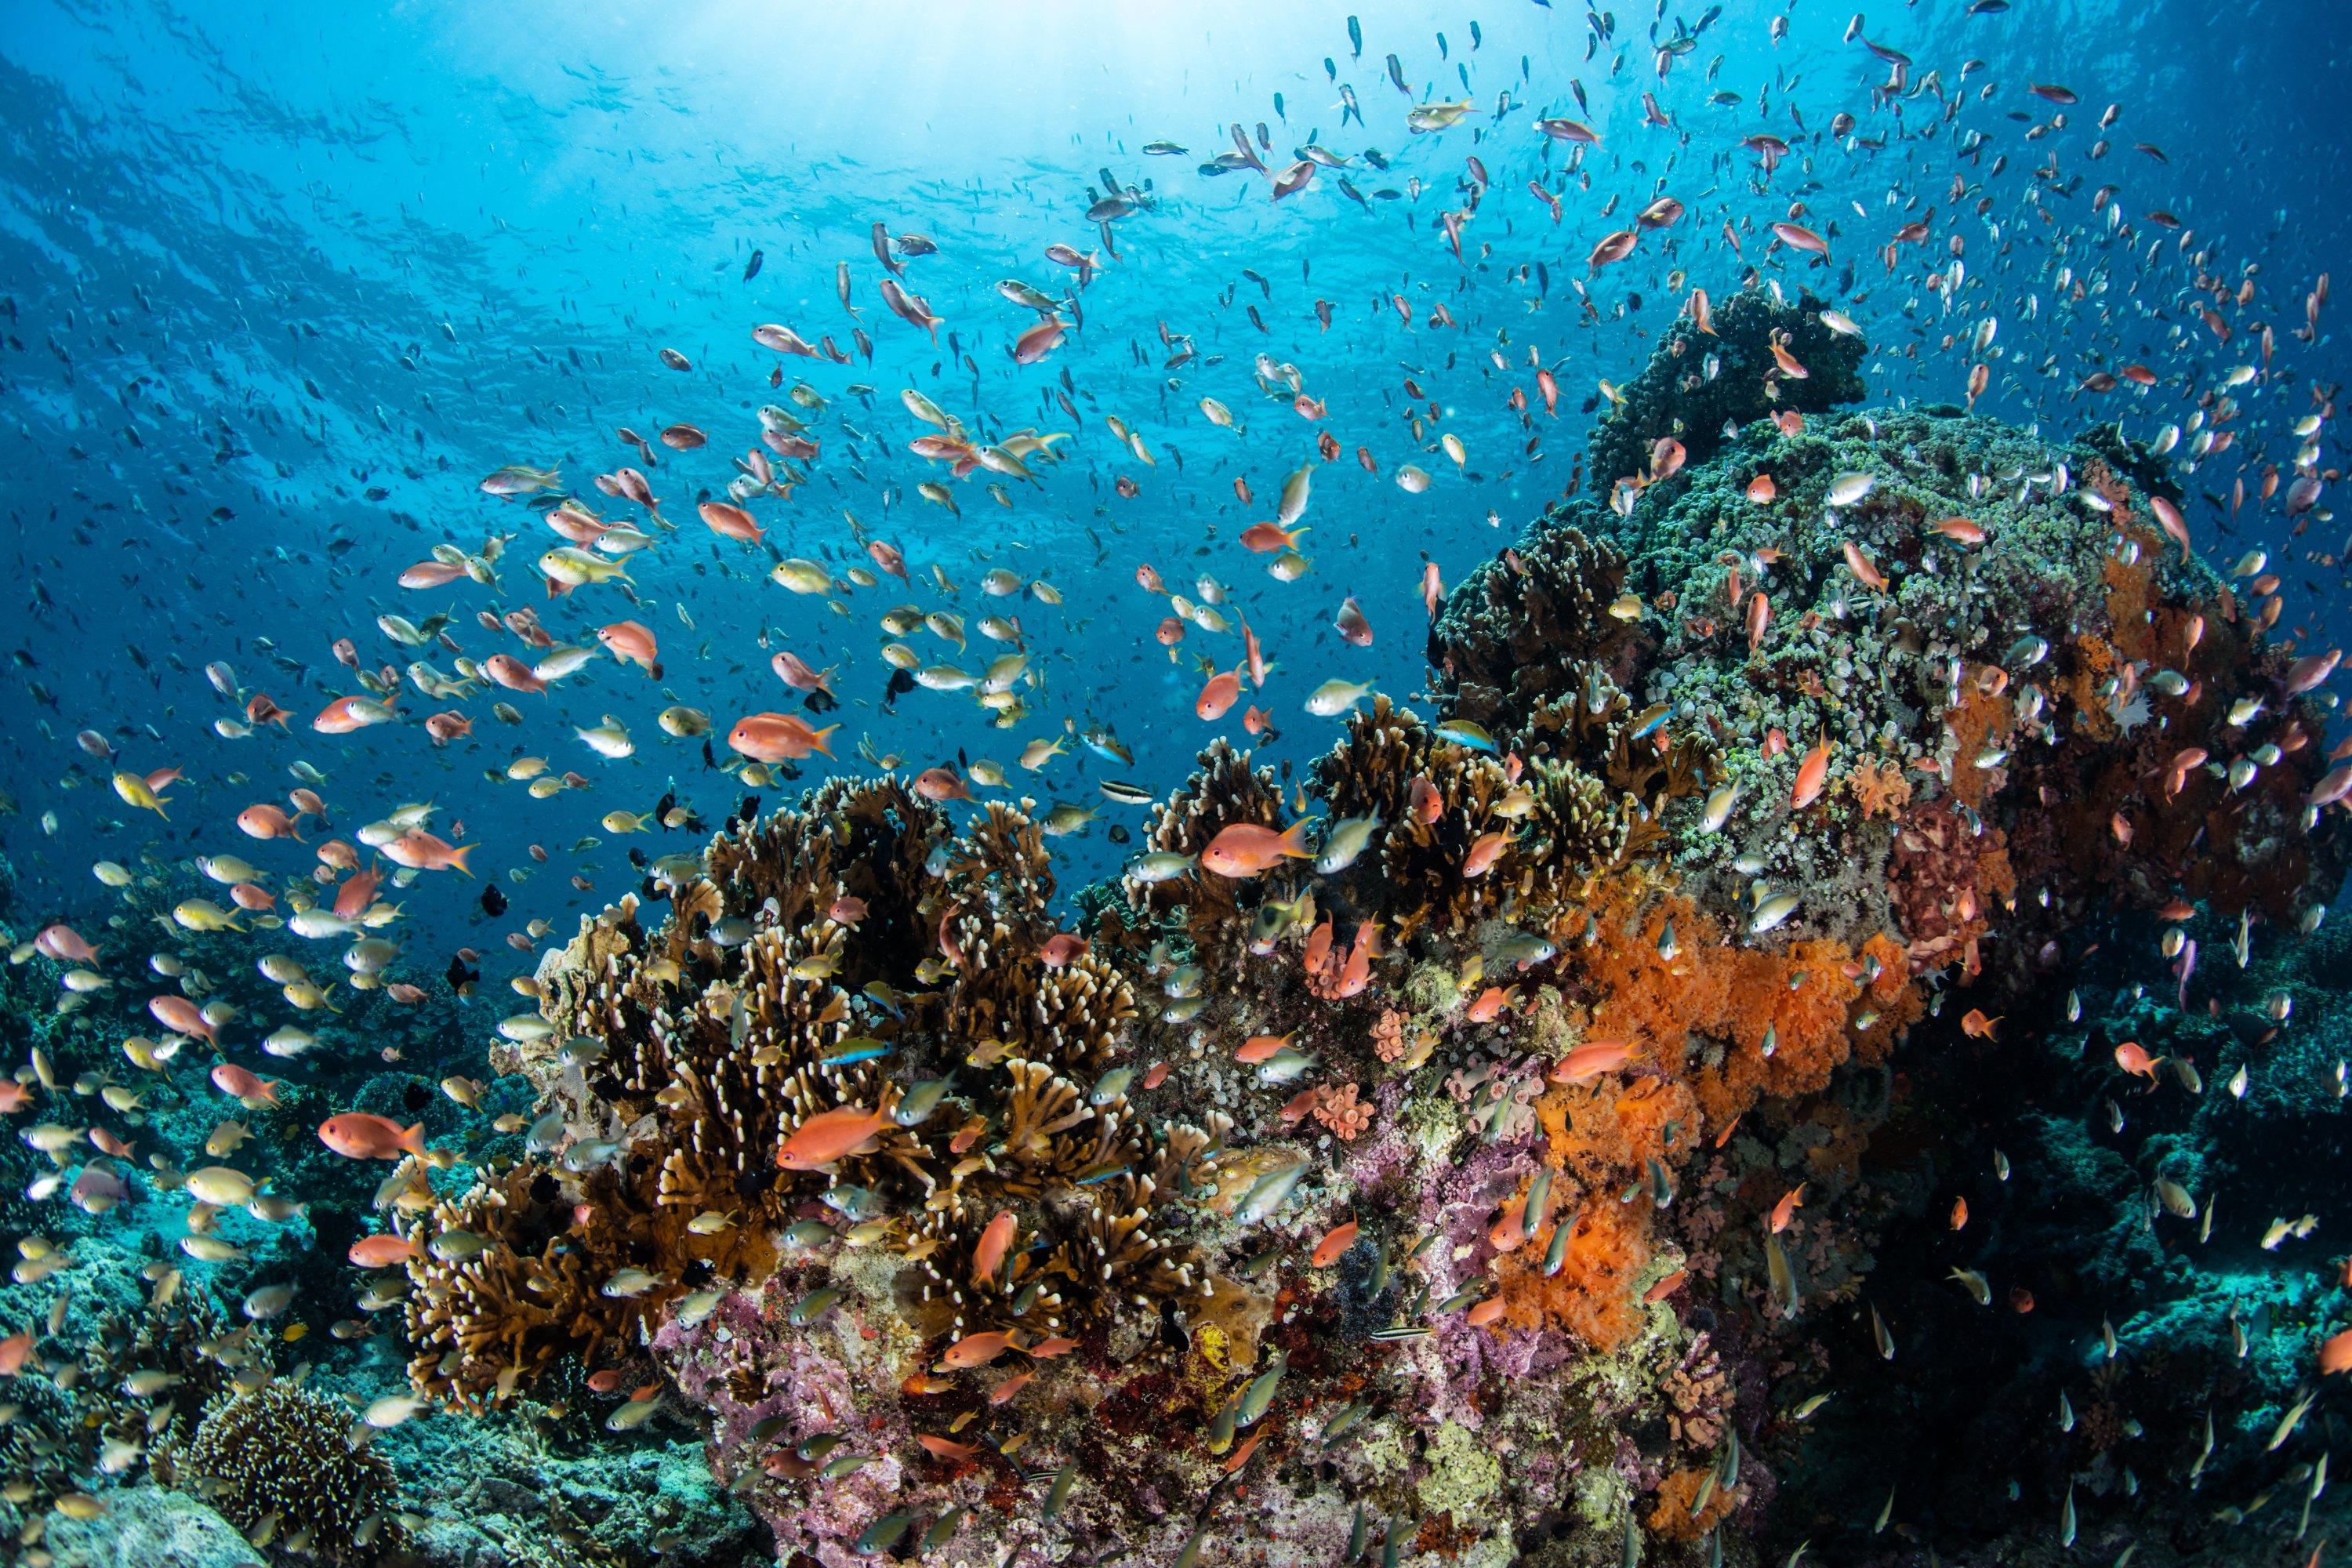 Protecting 30% of the Mediterranean Sea will boost fish stocks and  biodiversity - WWF report